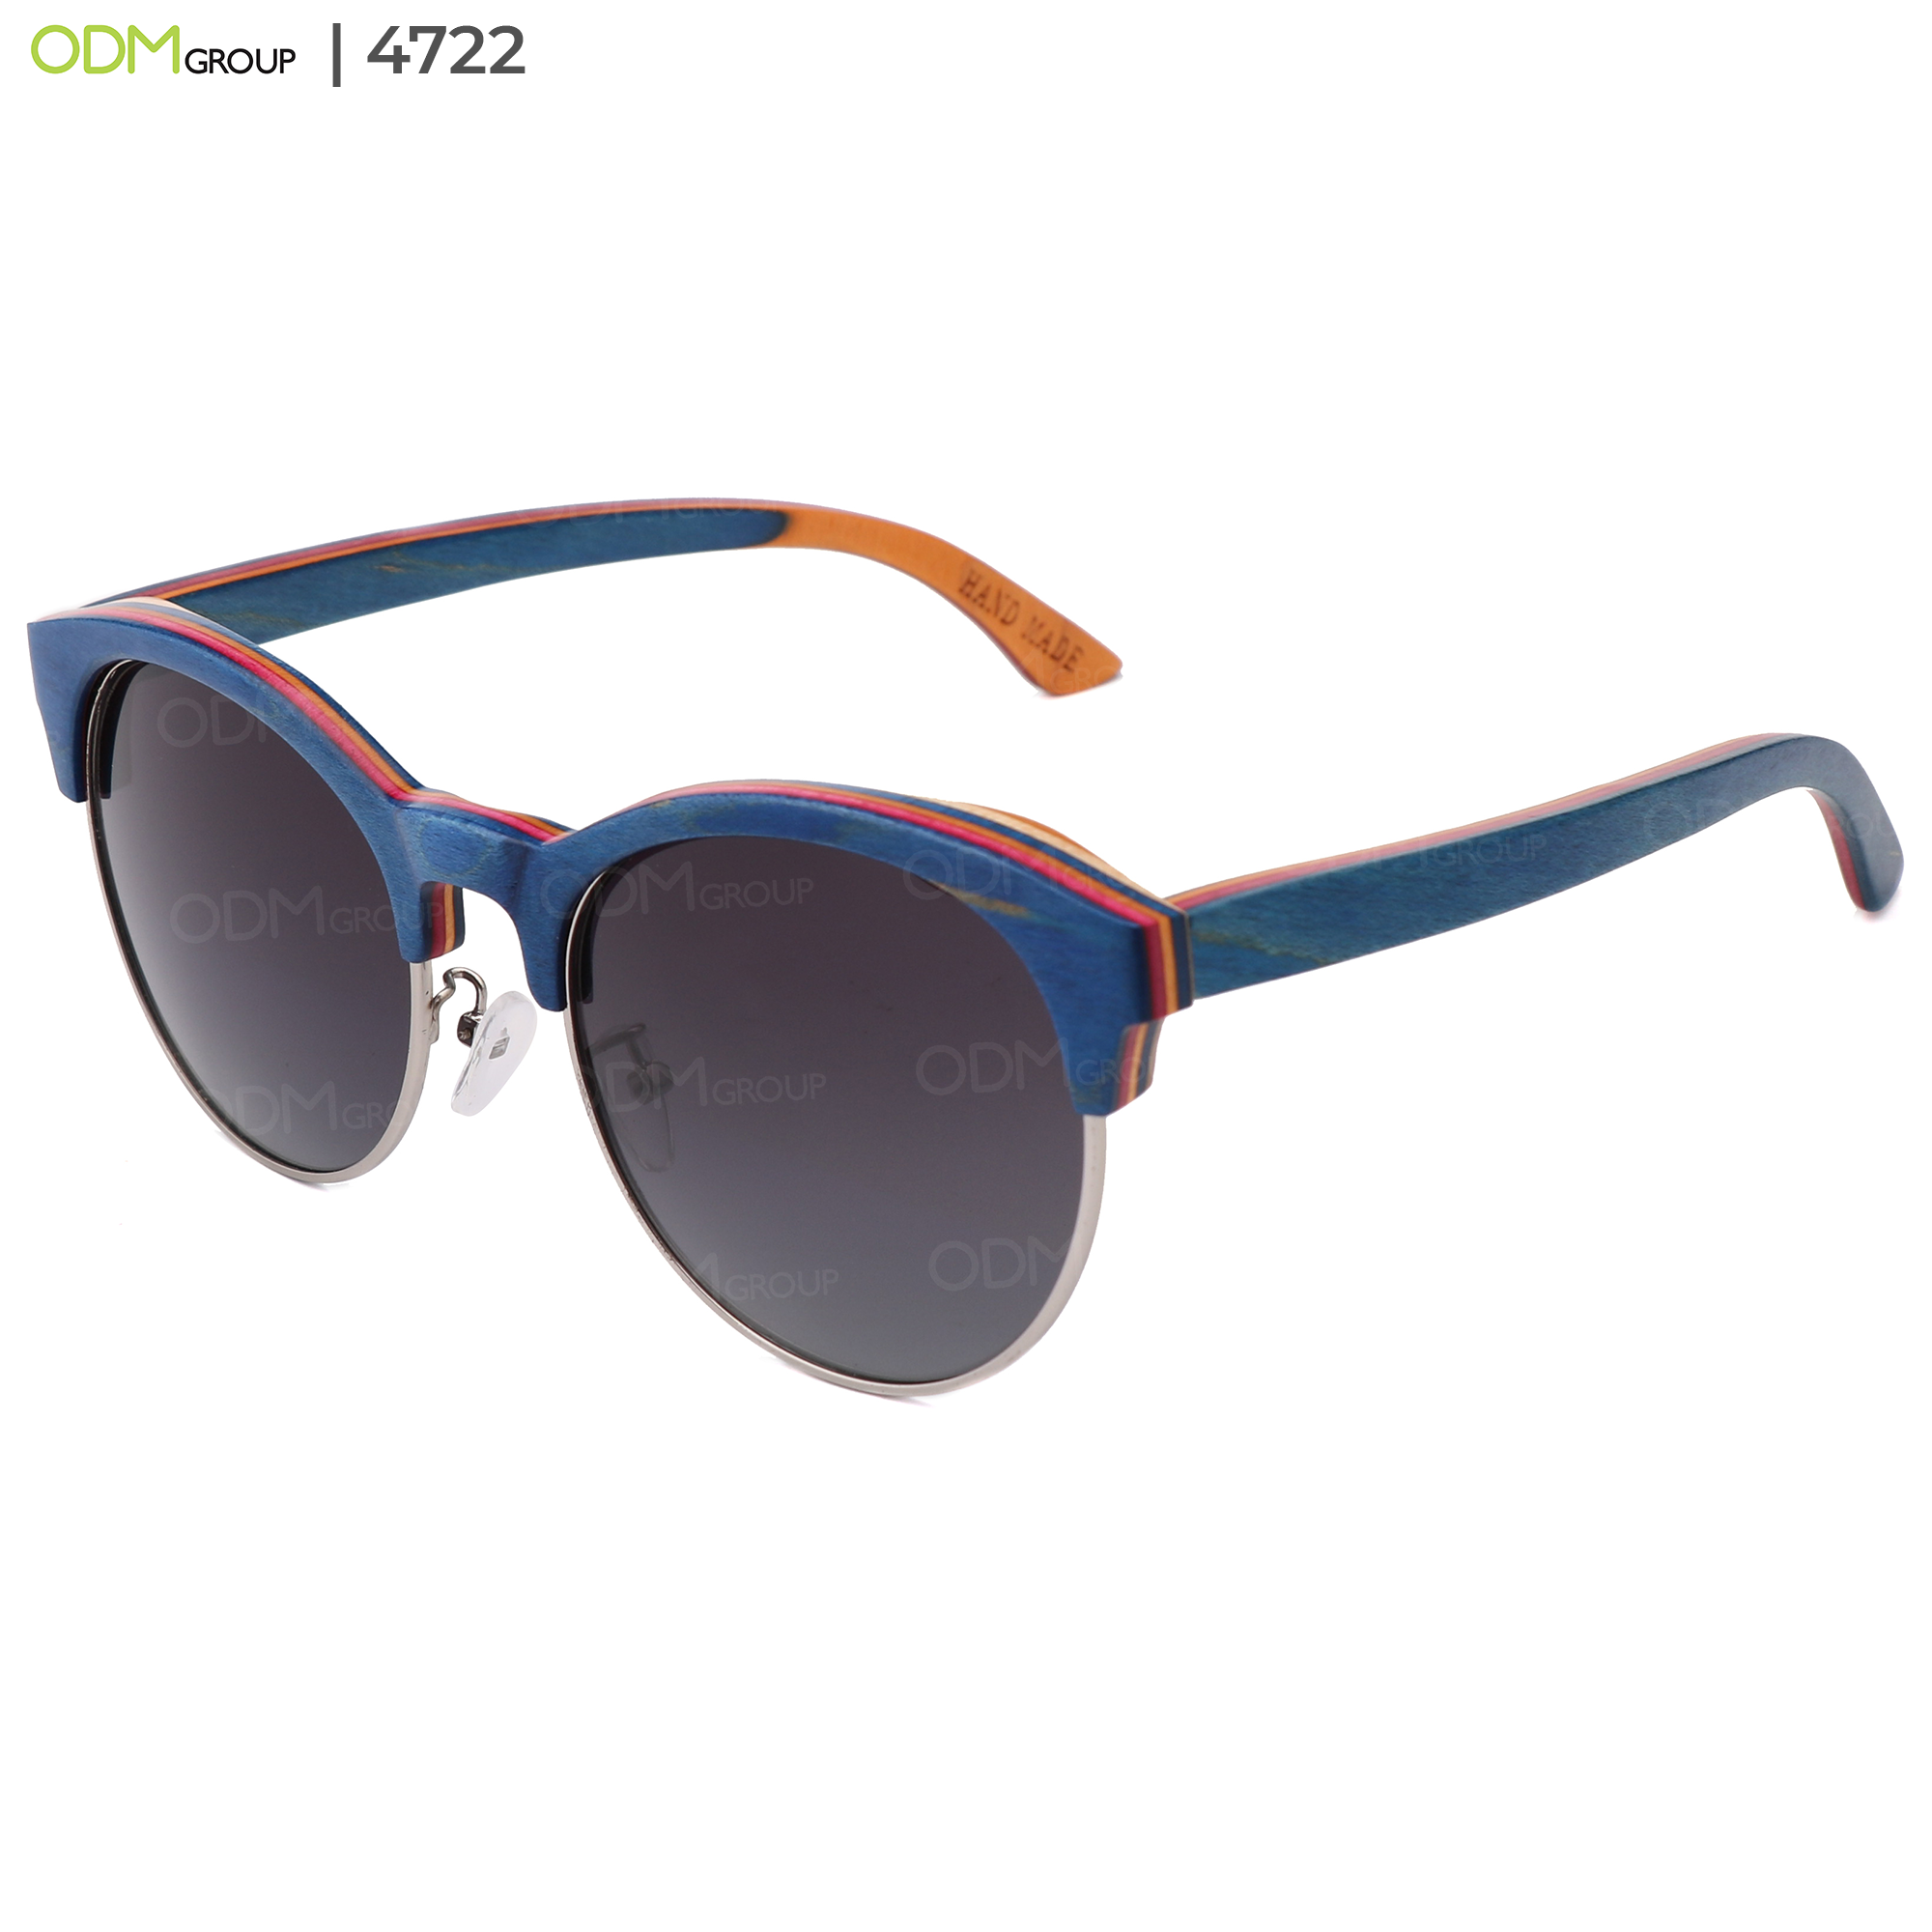 Custom Promotional Sunglasses customized with your business logo or slogan  on different sunglasses models.